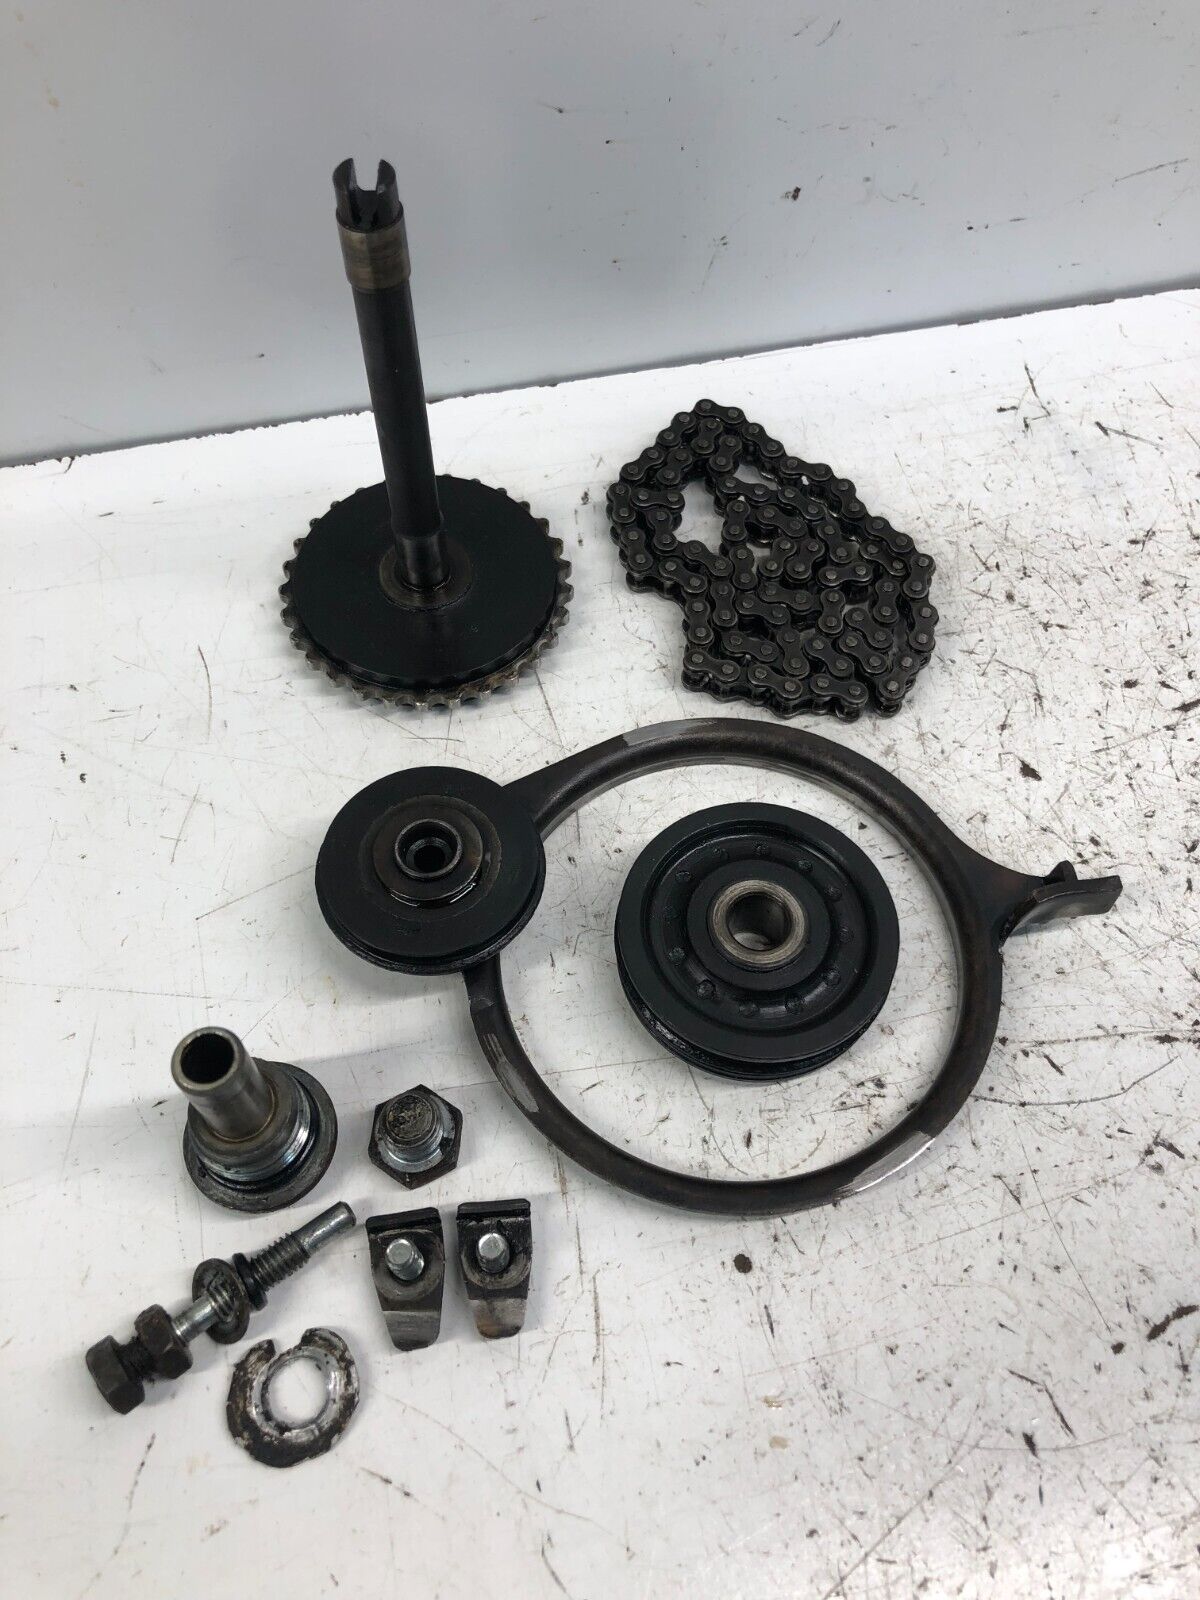 Honda s90 s 90 Engine Camshaft / Cam Chain Tensioner Assembly